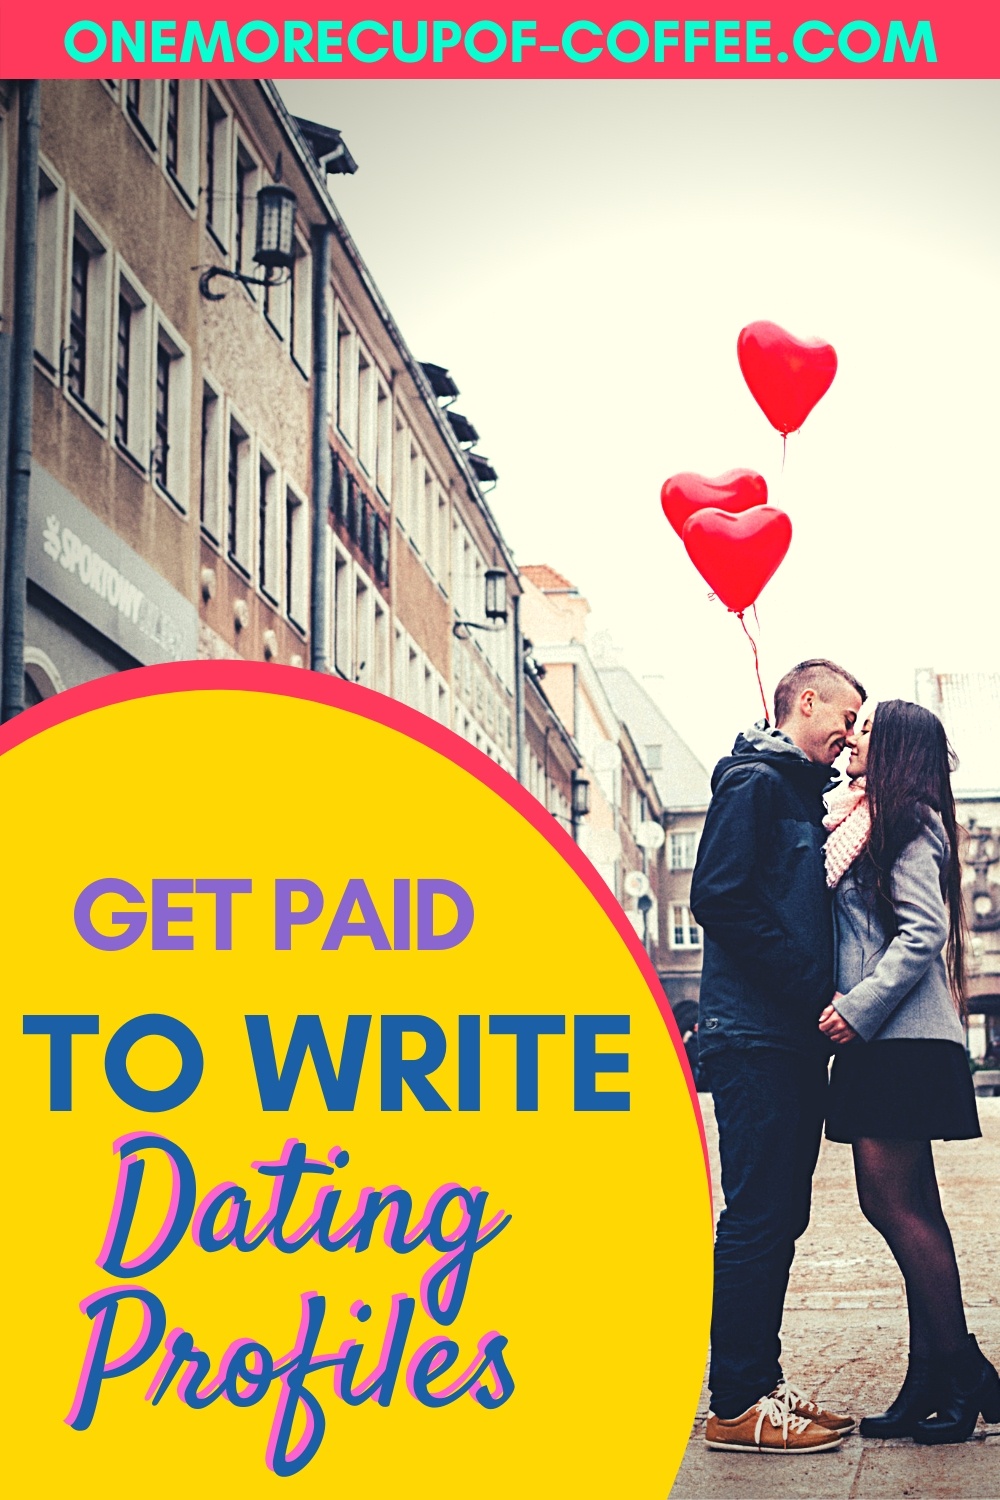 Man and woman kissing in the street to represent getting paid to write dating profiles.